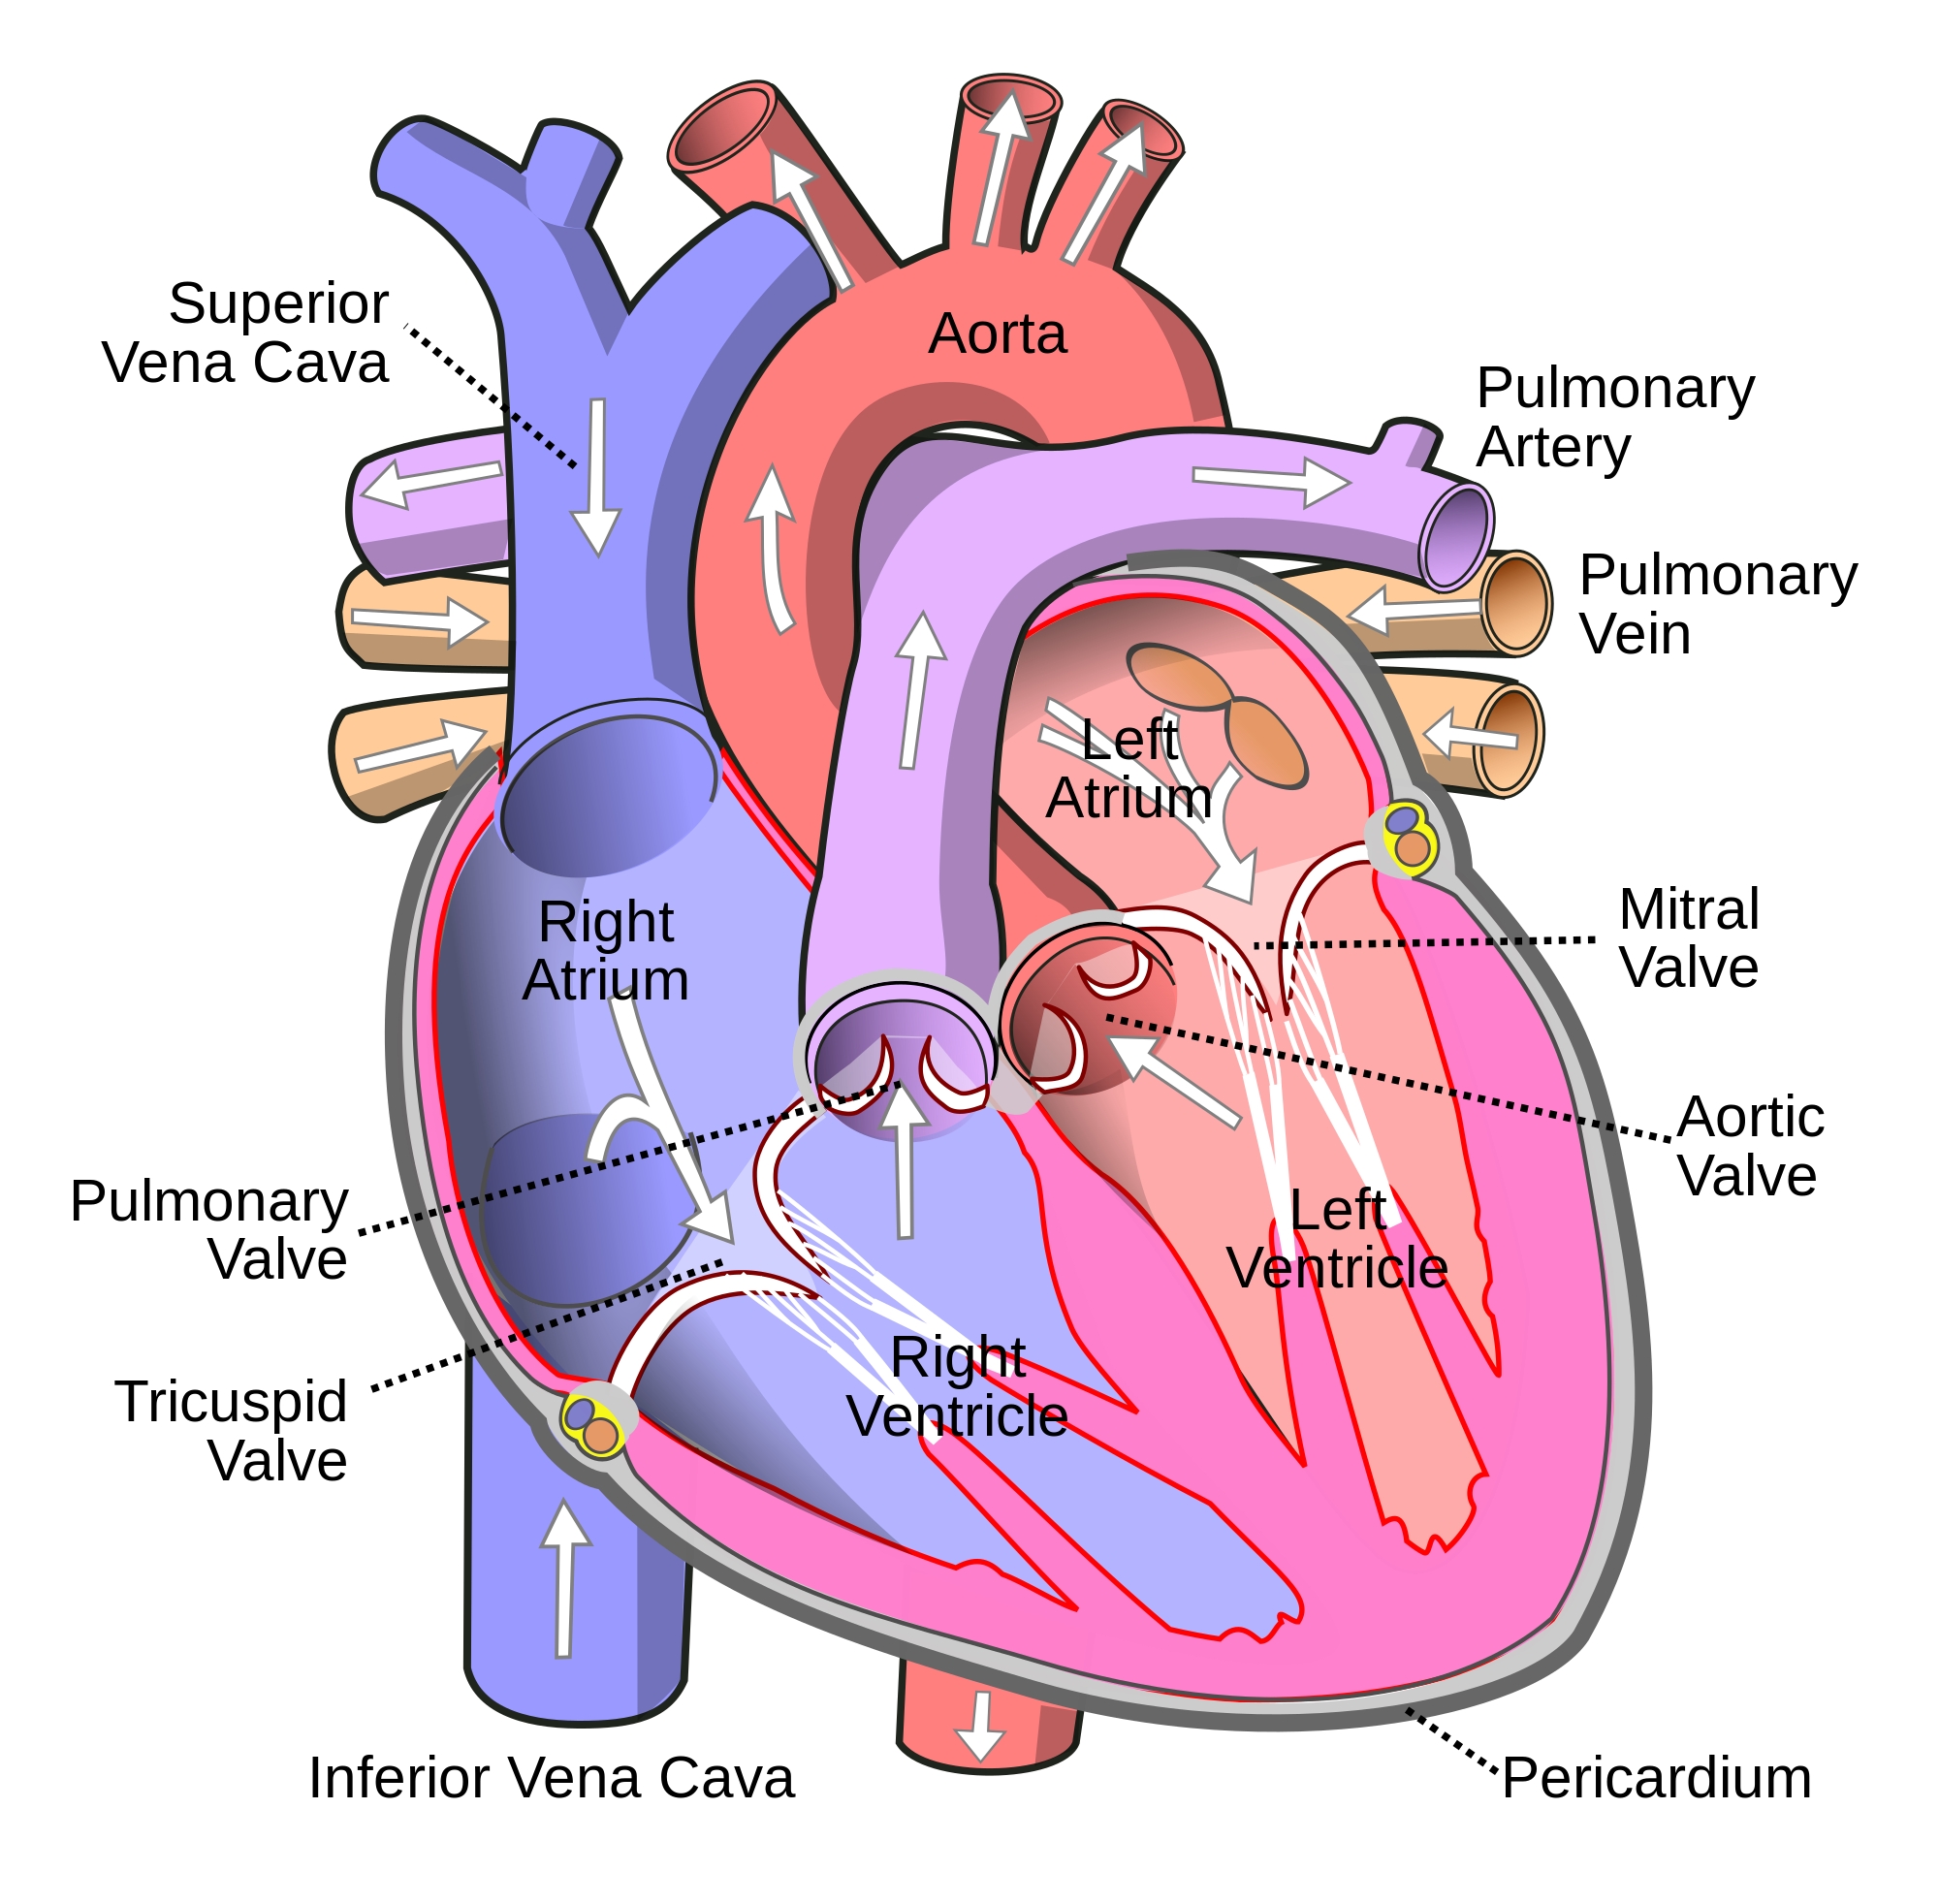 The heart is responsible for pumping oxygen-rich blood throughout the body.